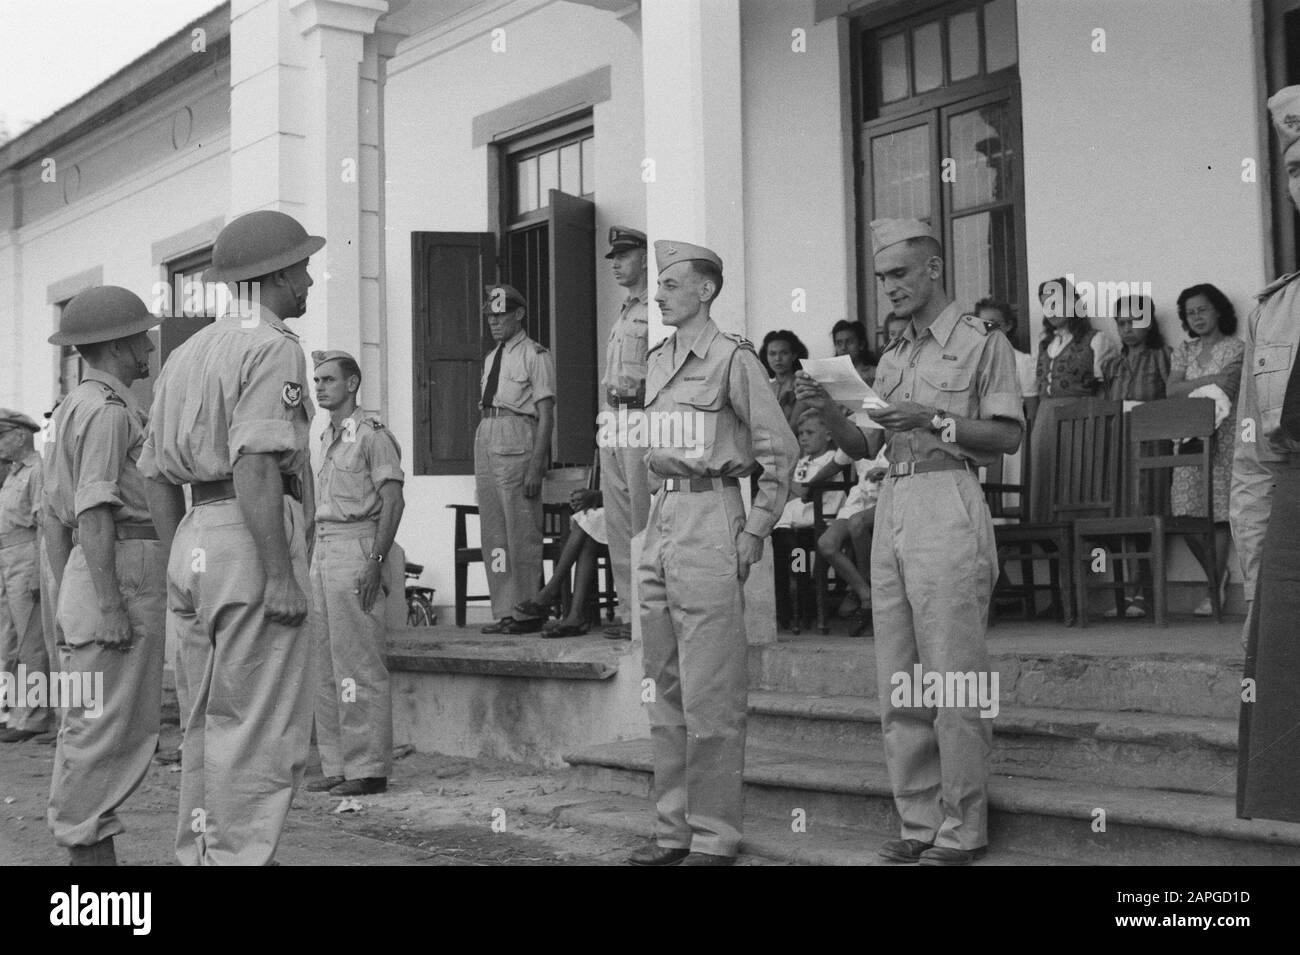 Award Sergeant J. Muller and Corporal M.J.B. Baggerman at Bandoeng Description: Collection Photo Collection Service for Army Contacts Indonesia, photon number 265-1-2 Date: July 1947 Location: Bandung, Indonesia, Dutch East Indies Stock Photo